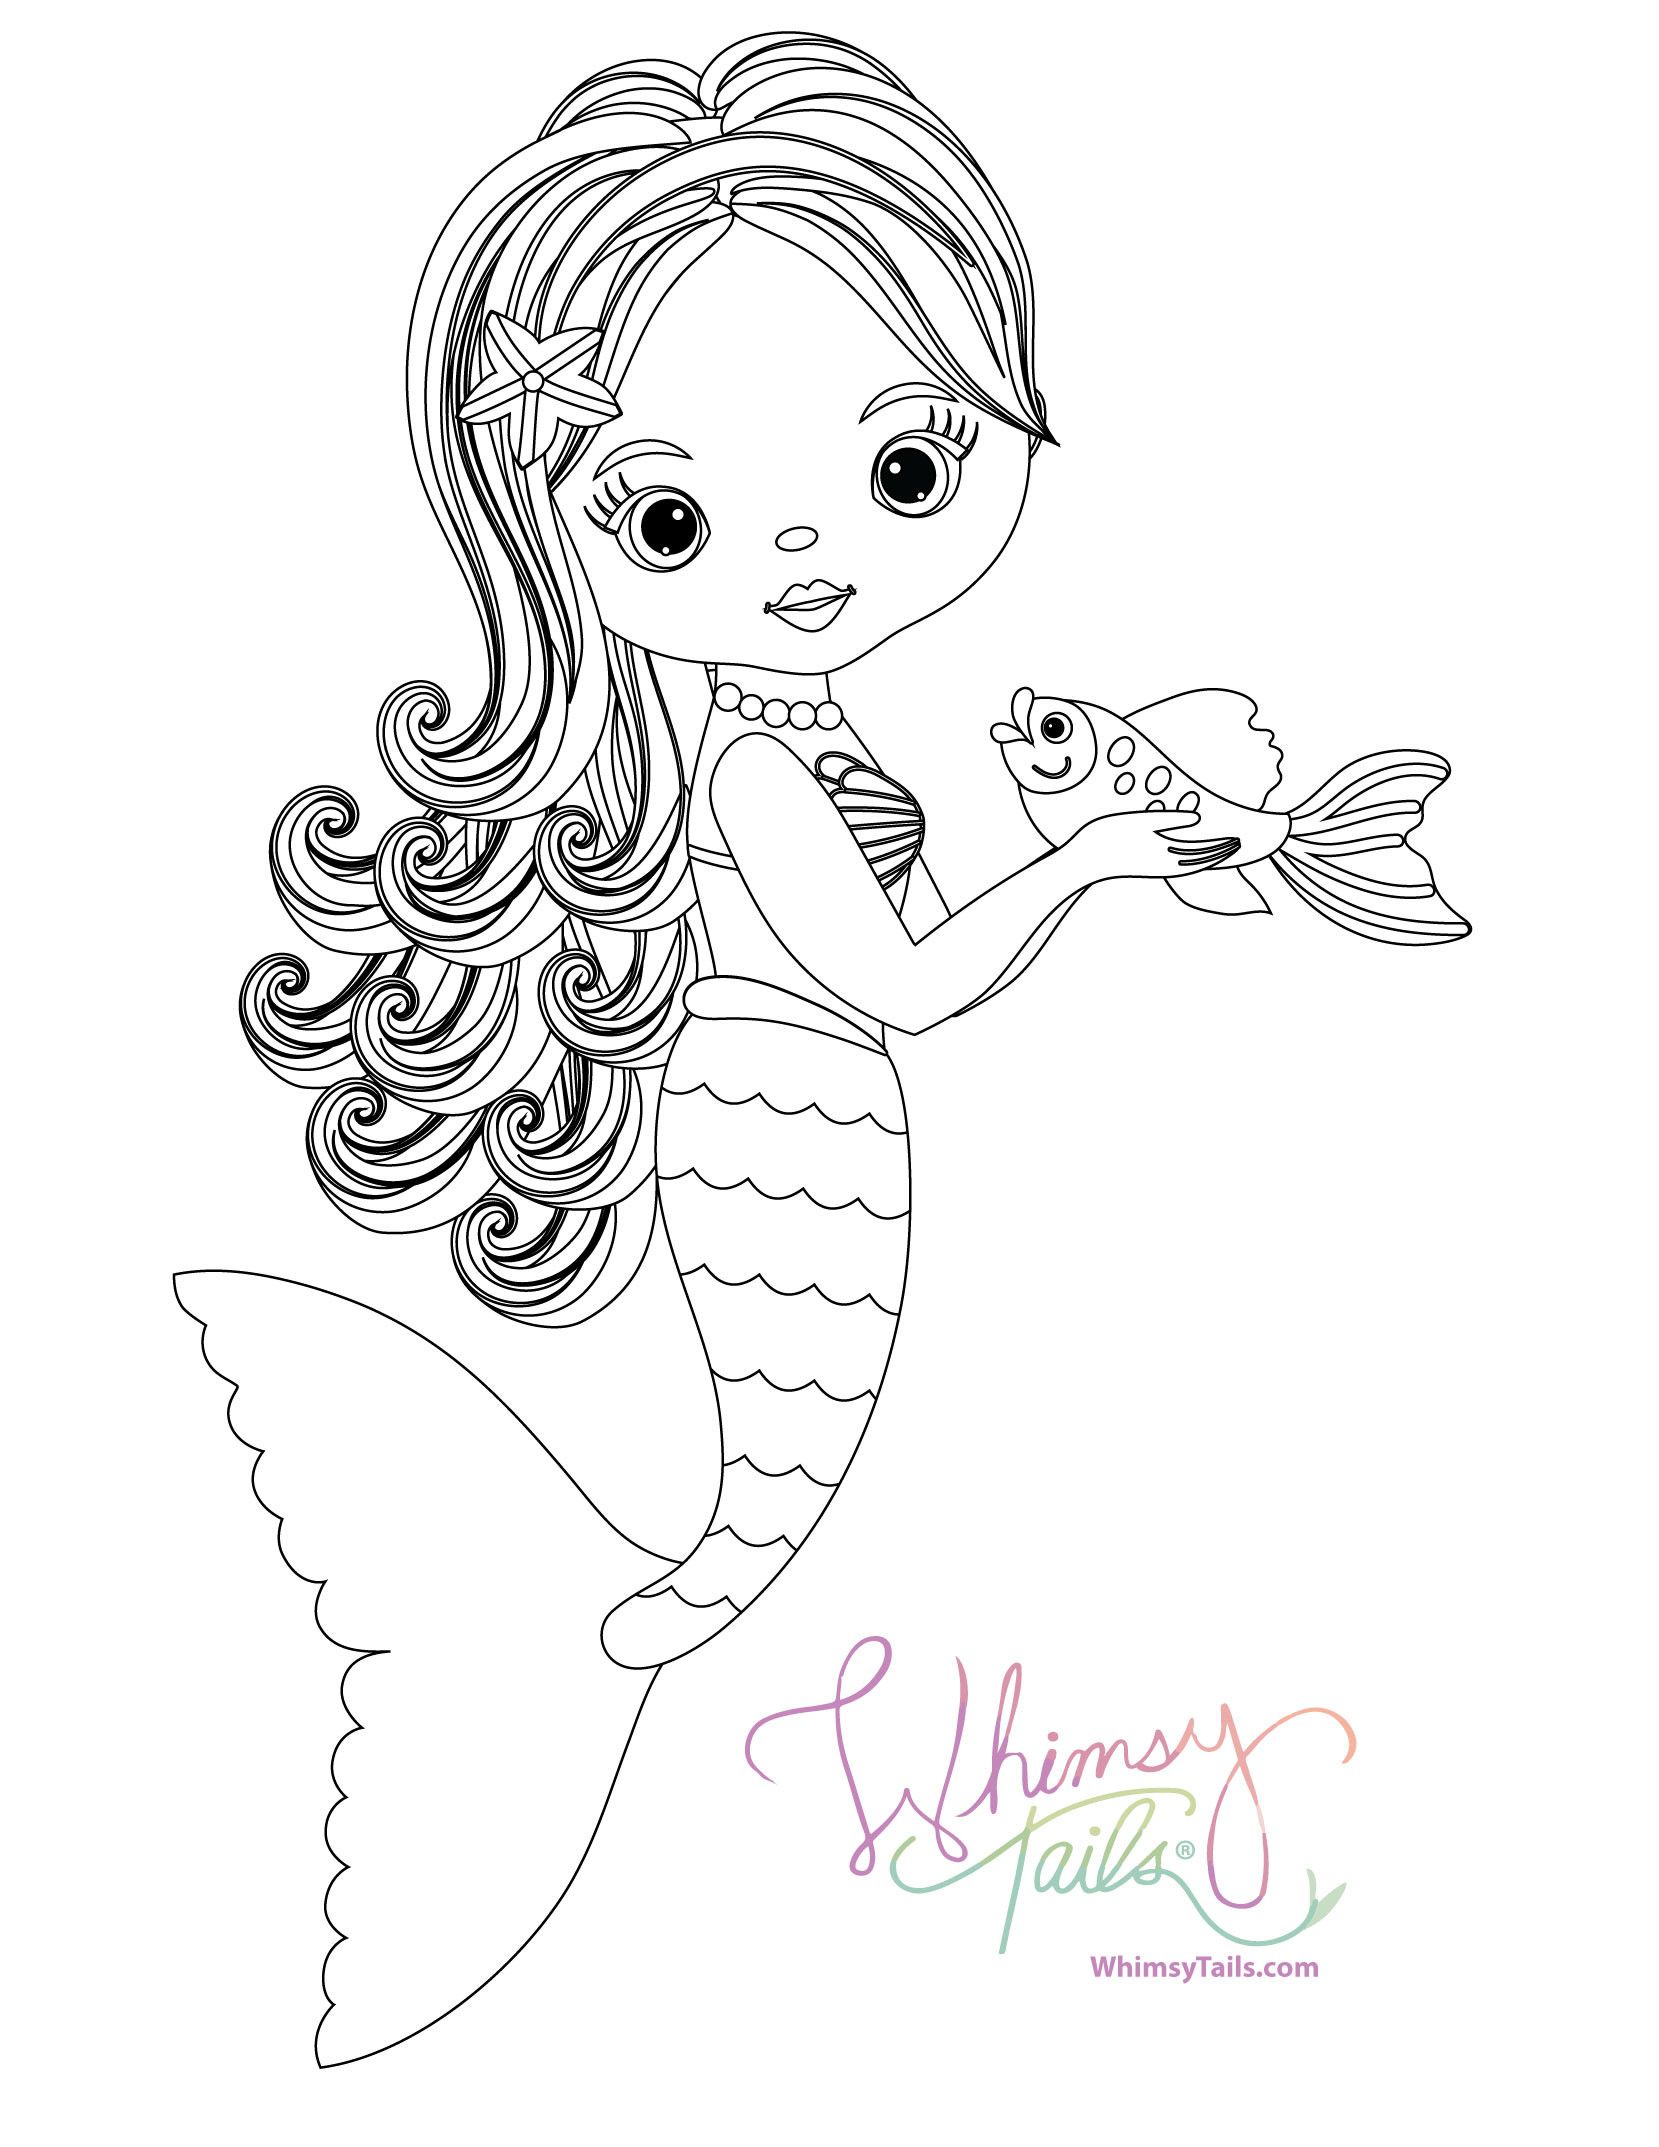 Mermaid Tail Coloring Page - youngandtae.com | Mermaid coloring pages, Free  coloring pictures, Unicorn coloring pages